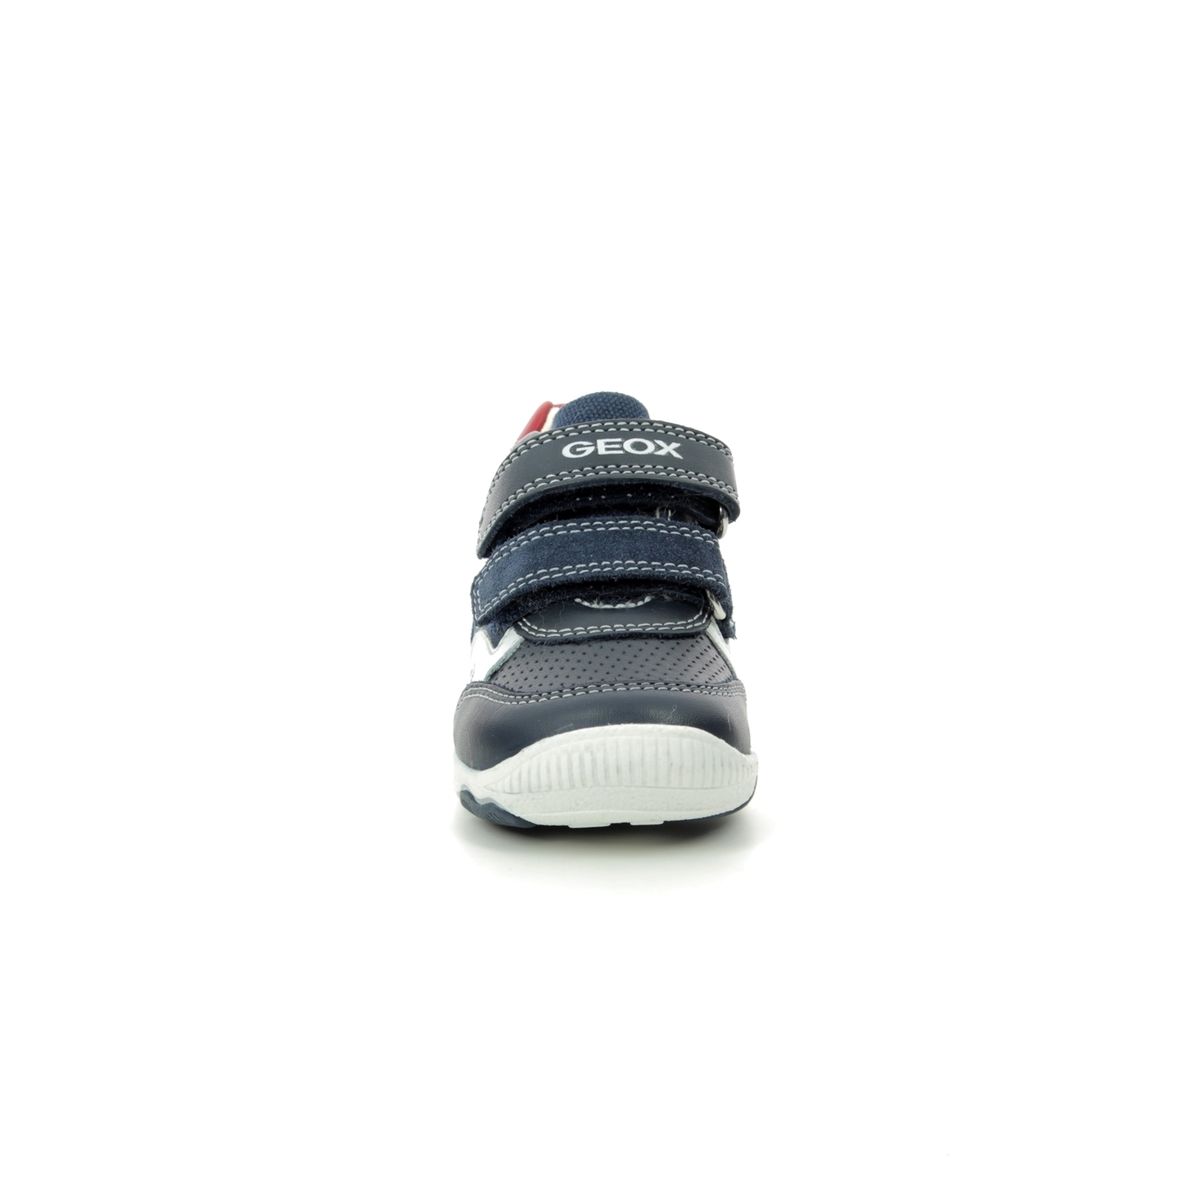 Geox Baby Balu Boy B920PC-C4002 Navy leather first shoes